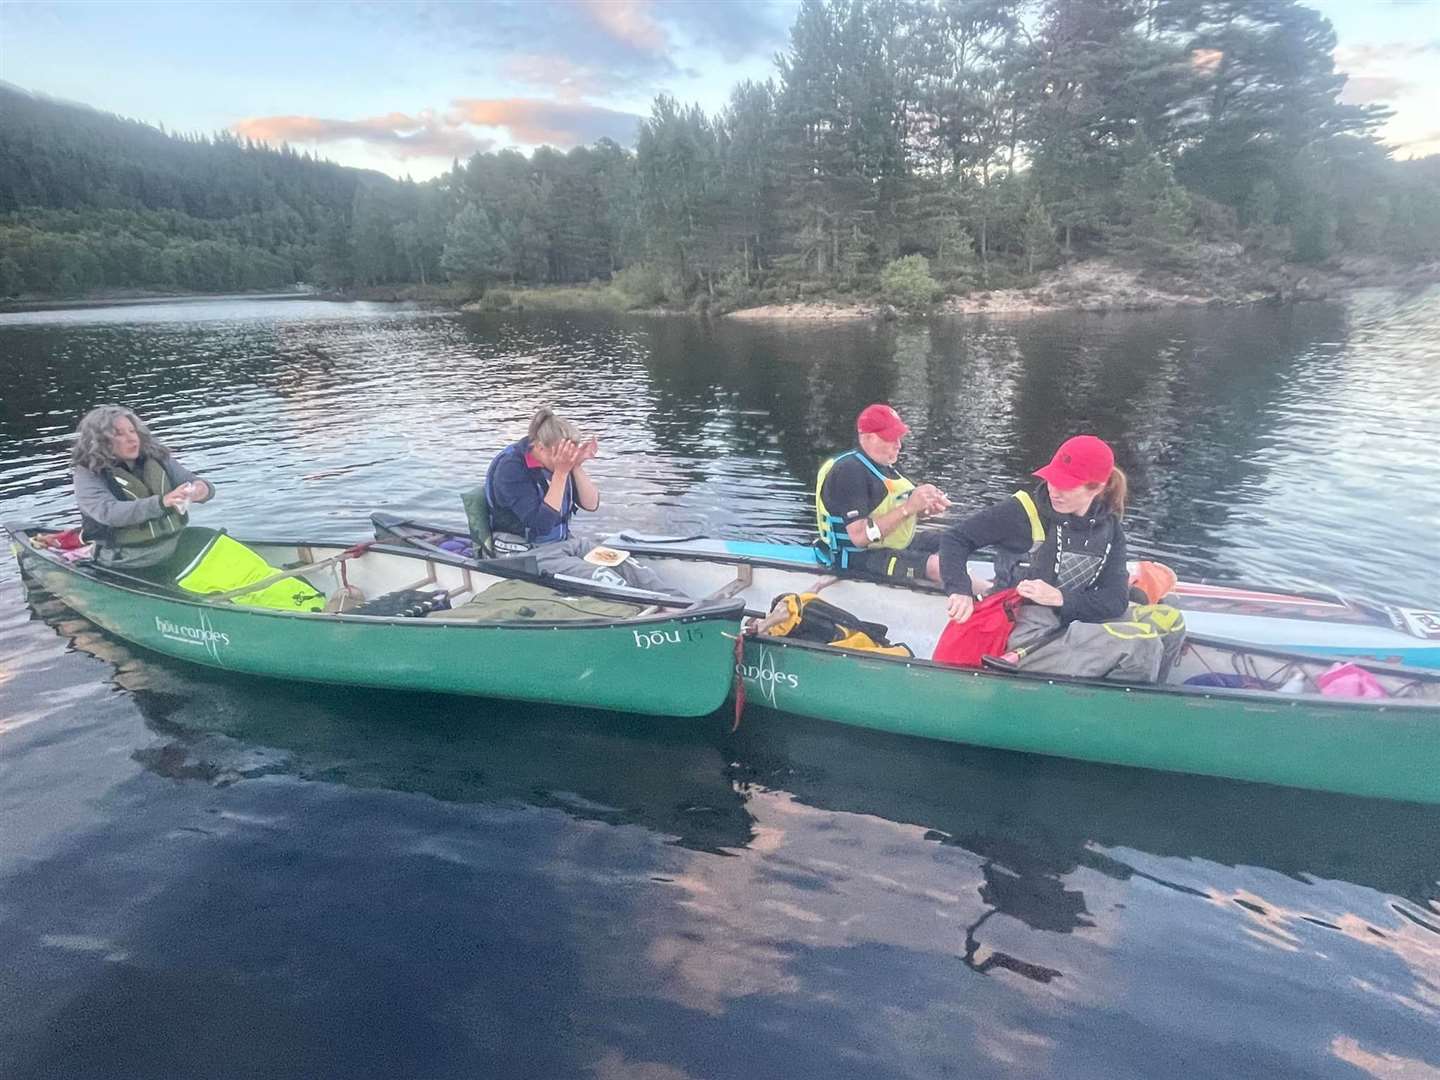 The group took to the waters Loch Beinn a’ Mheadhoin near Glen Affric on canoes and a paddleboard for the fundraising challenge.